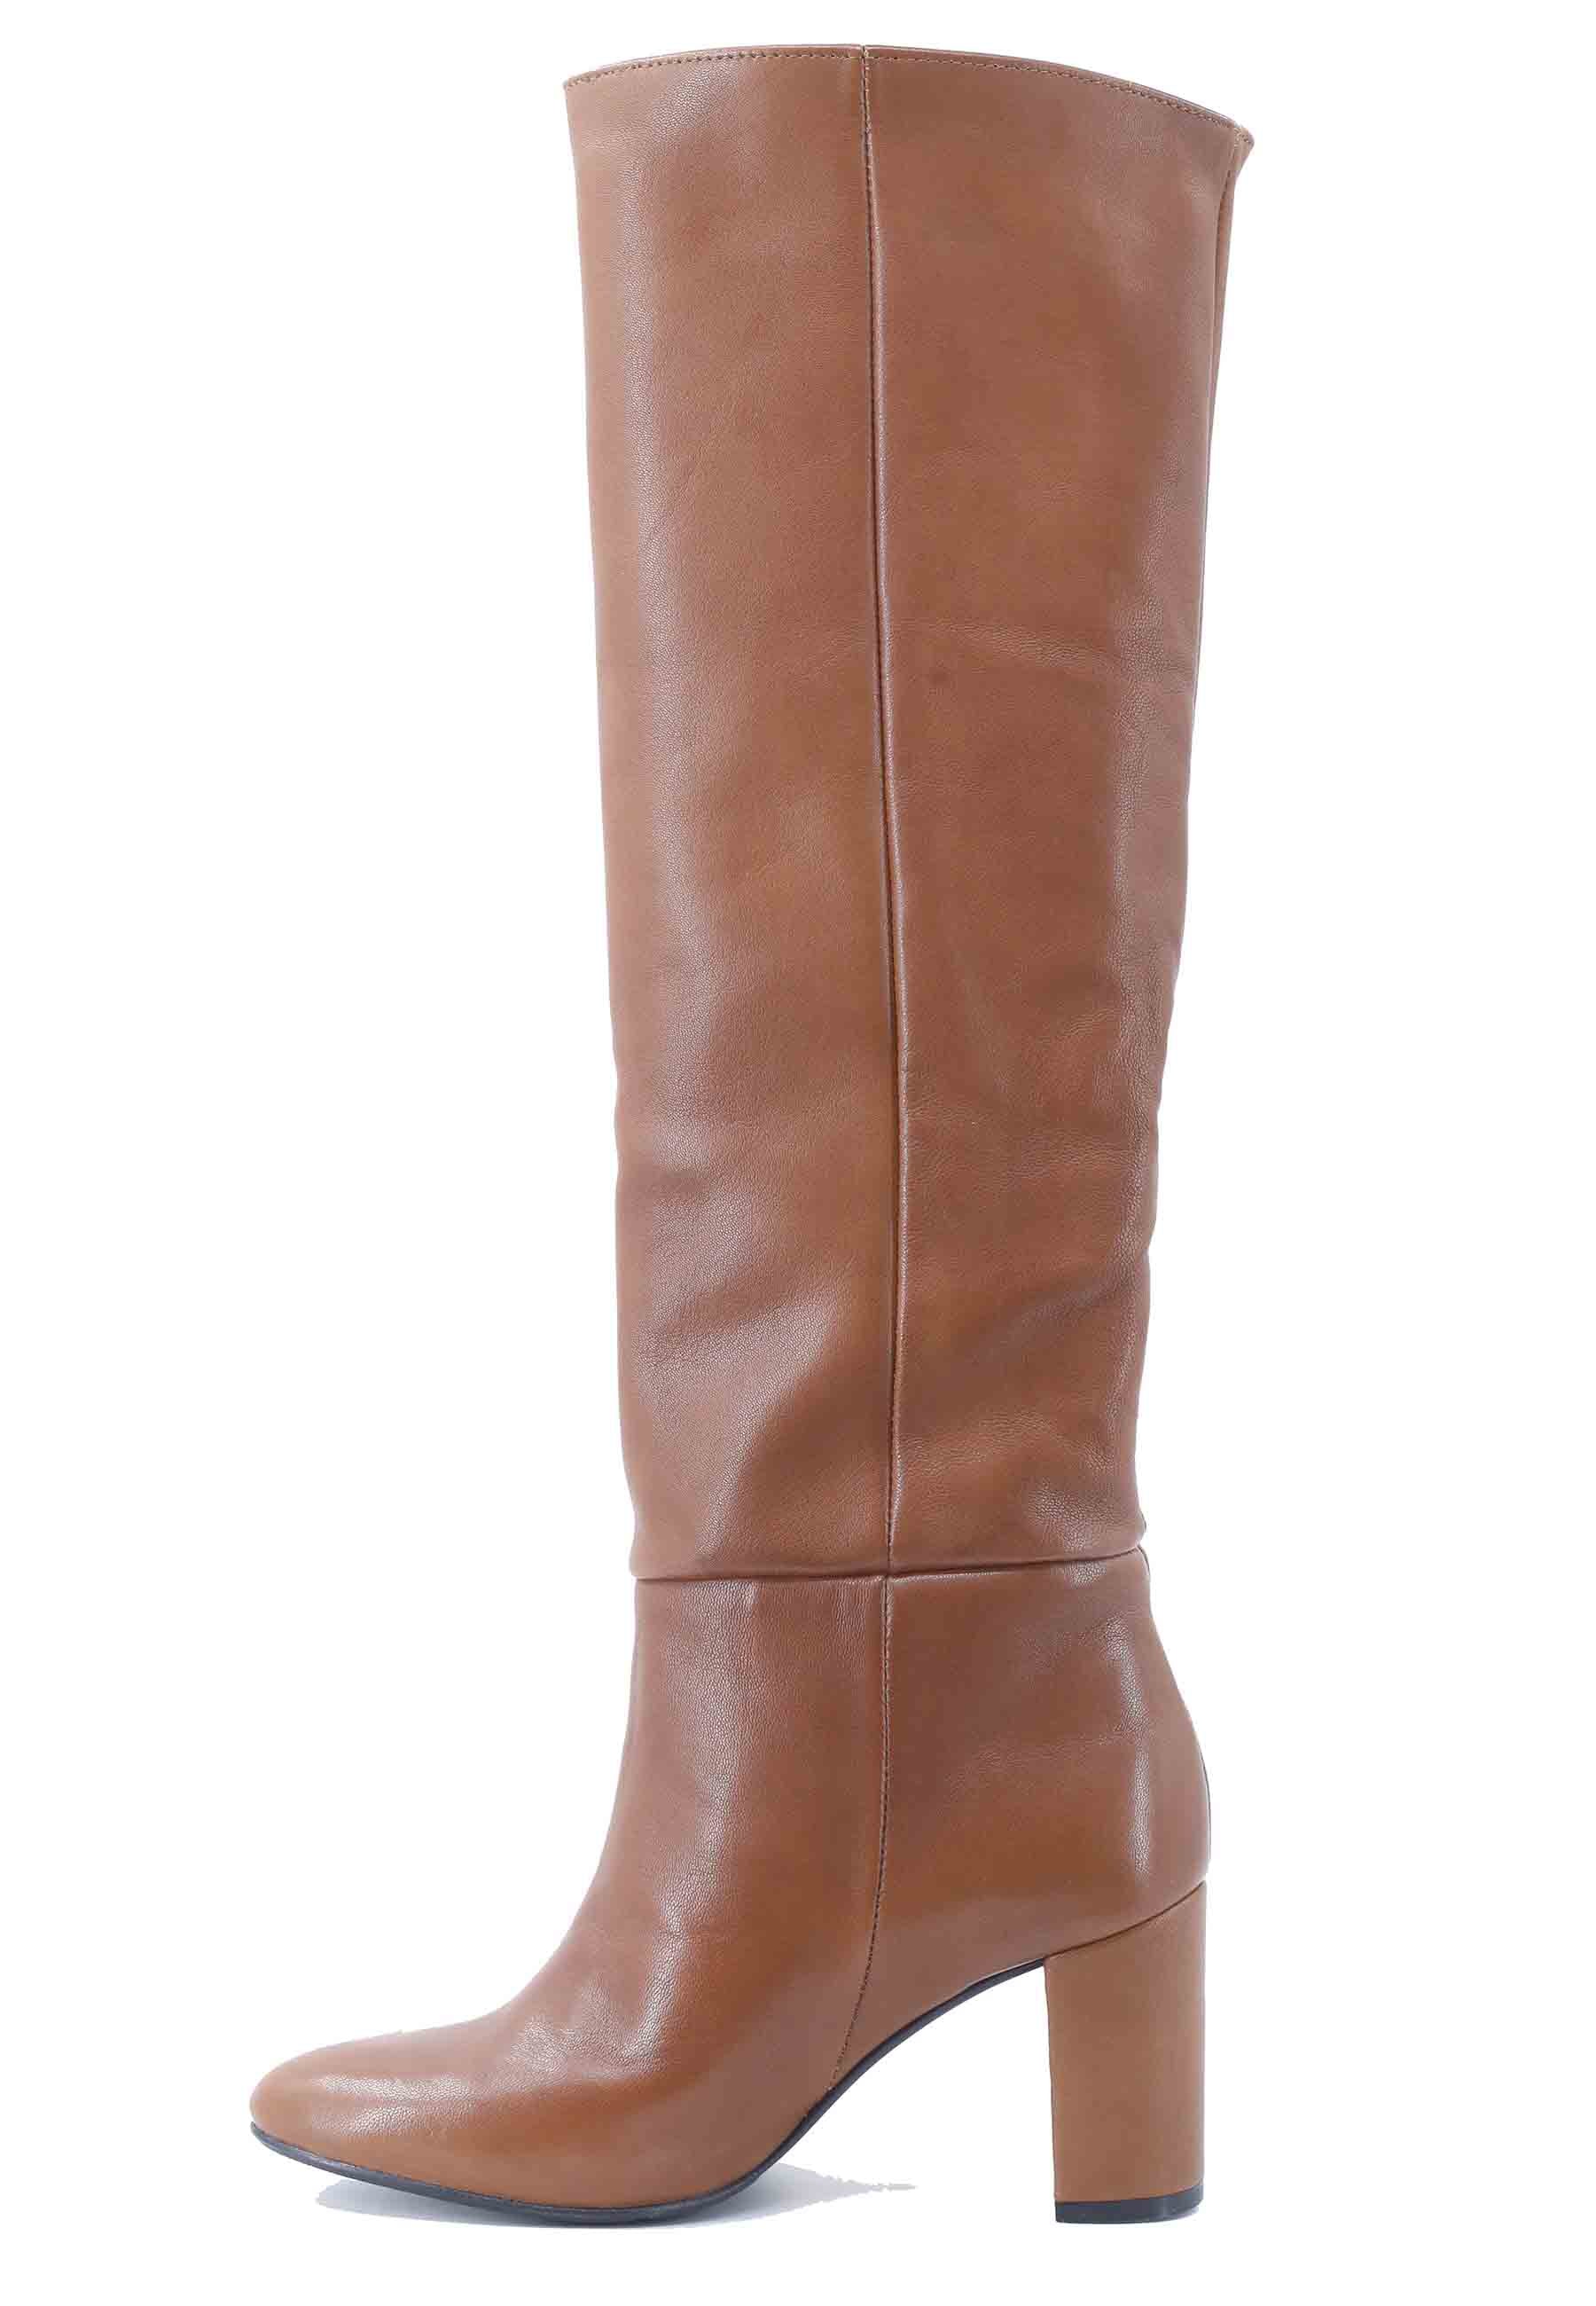 ST1593 women's tube boots in tan leather with high upper